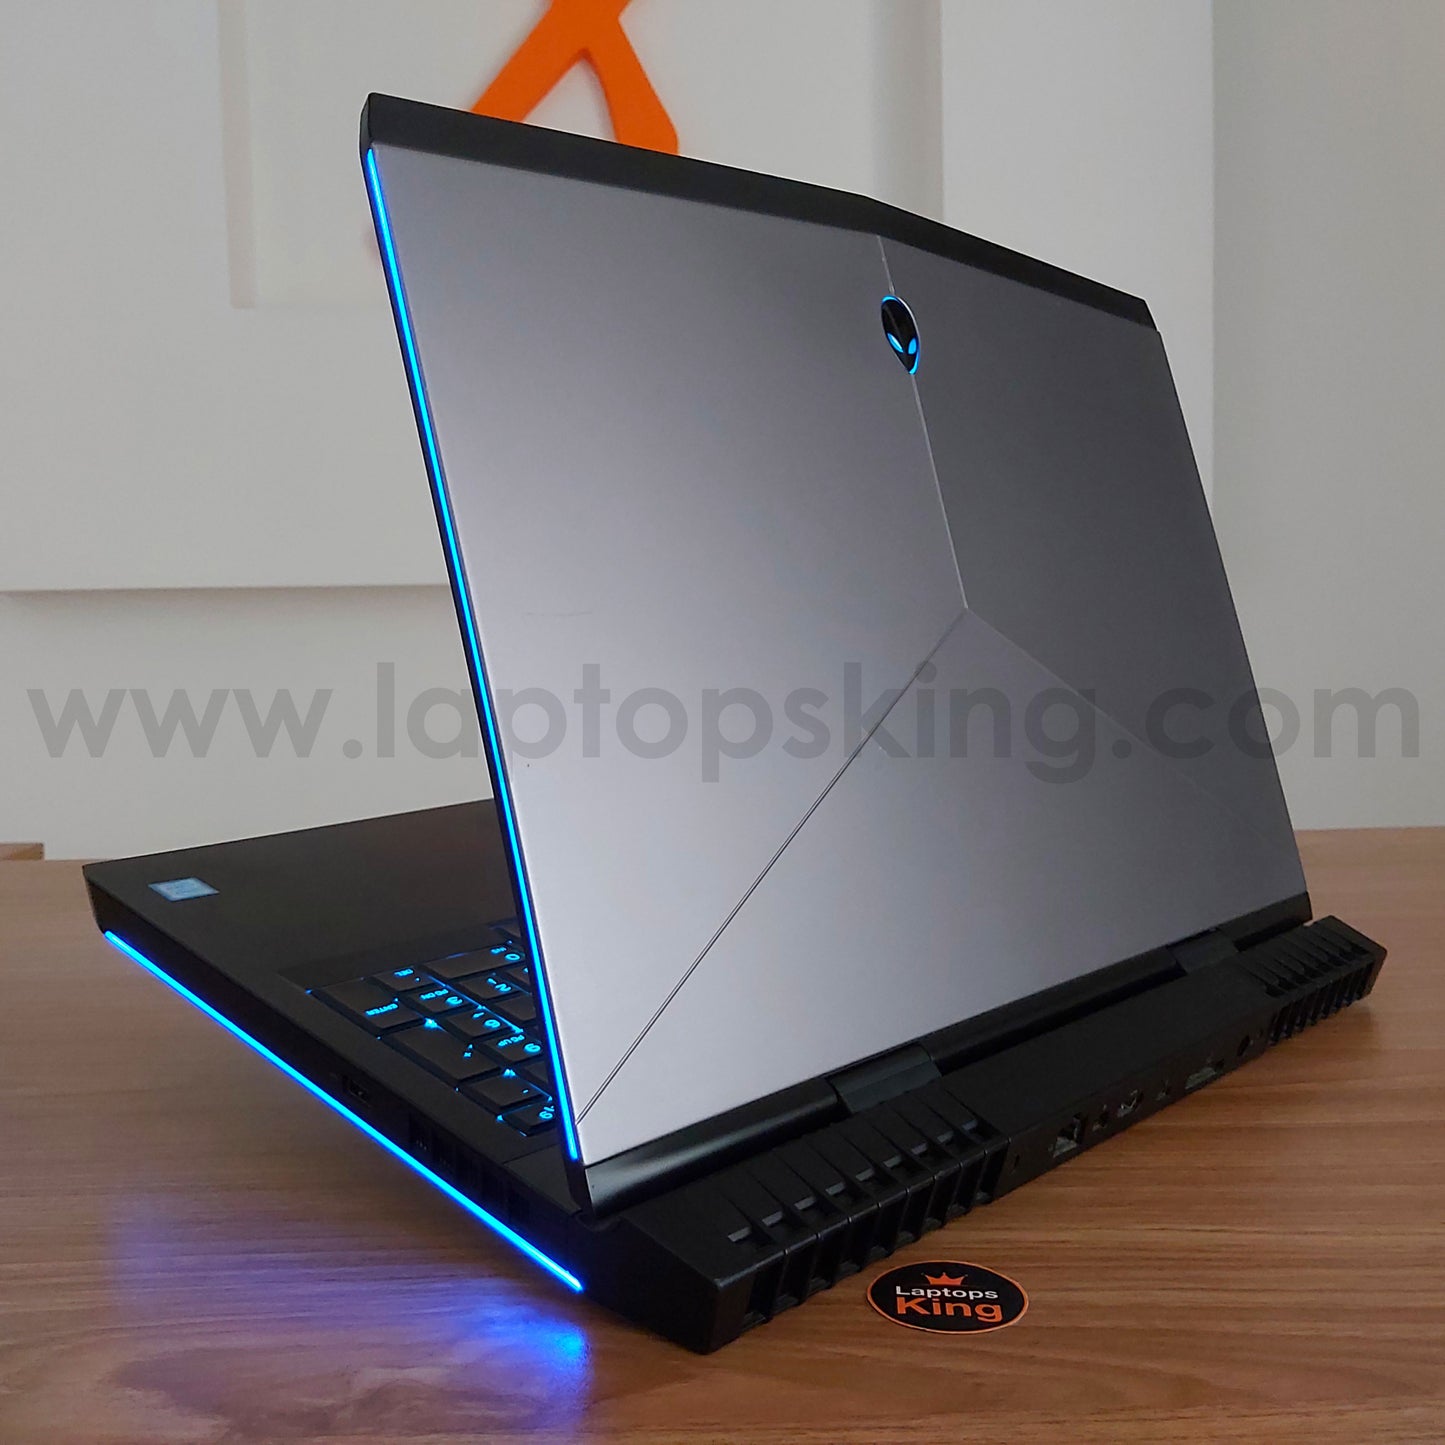 Alienware 17 R5 i7-8750h GTX 1080 RGB Gaming Laptop (Used Very Clean)